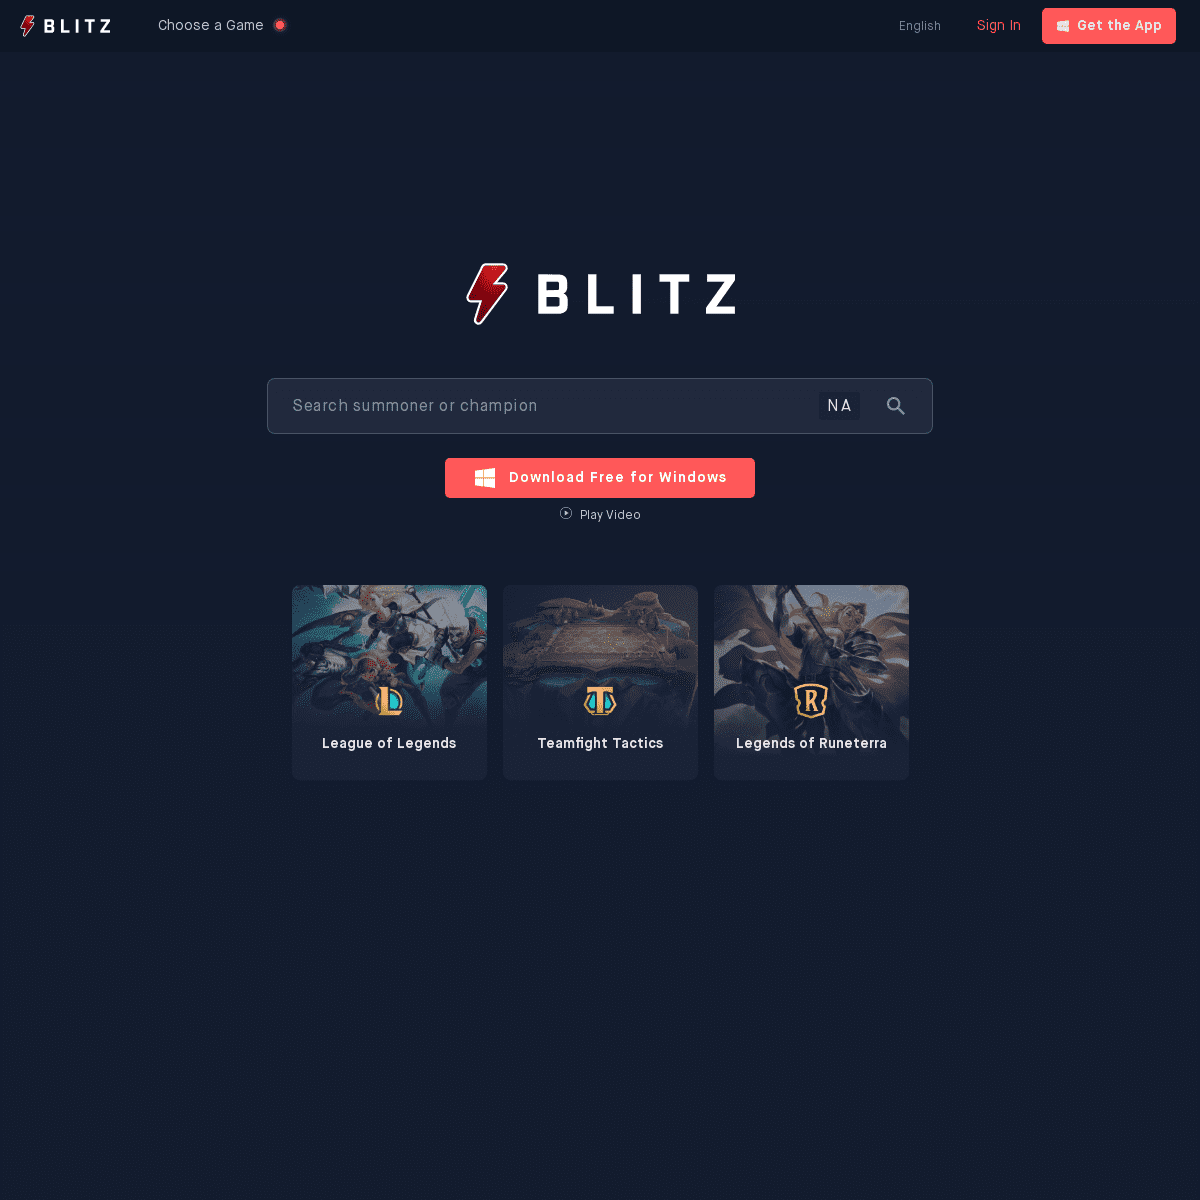 A complete backup of blitz.gg